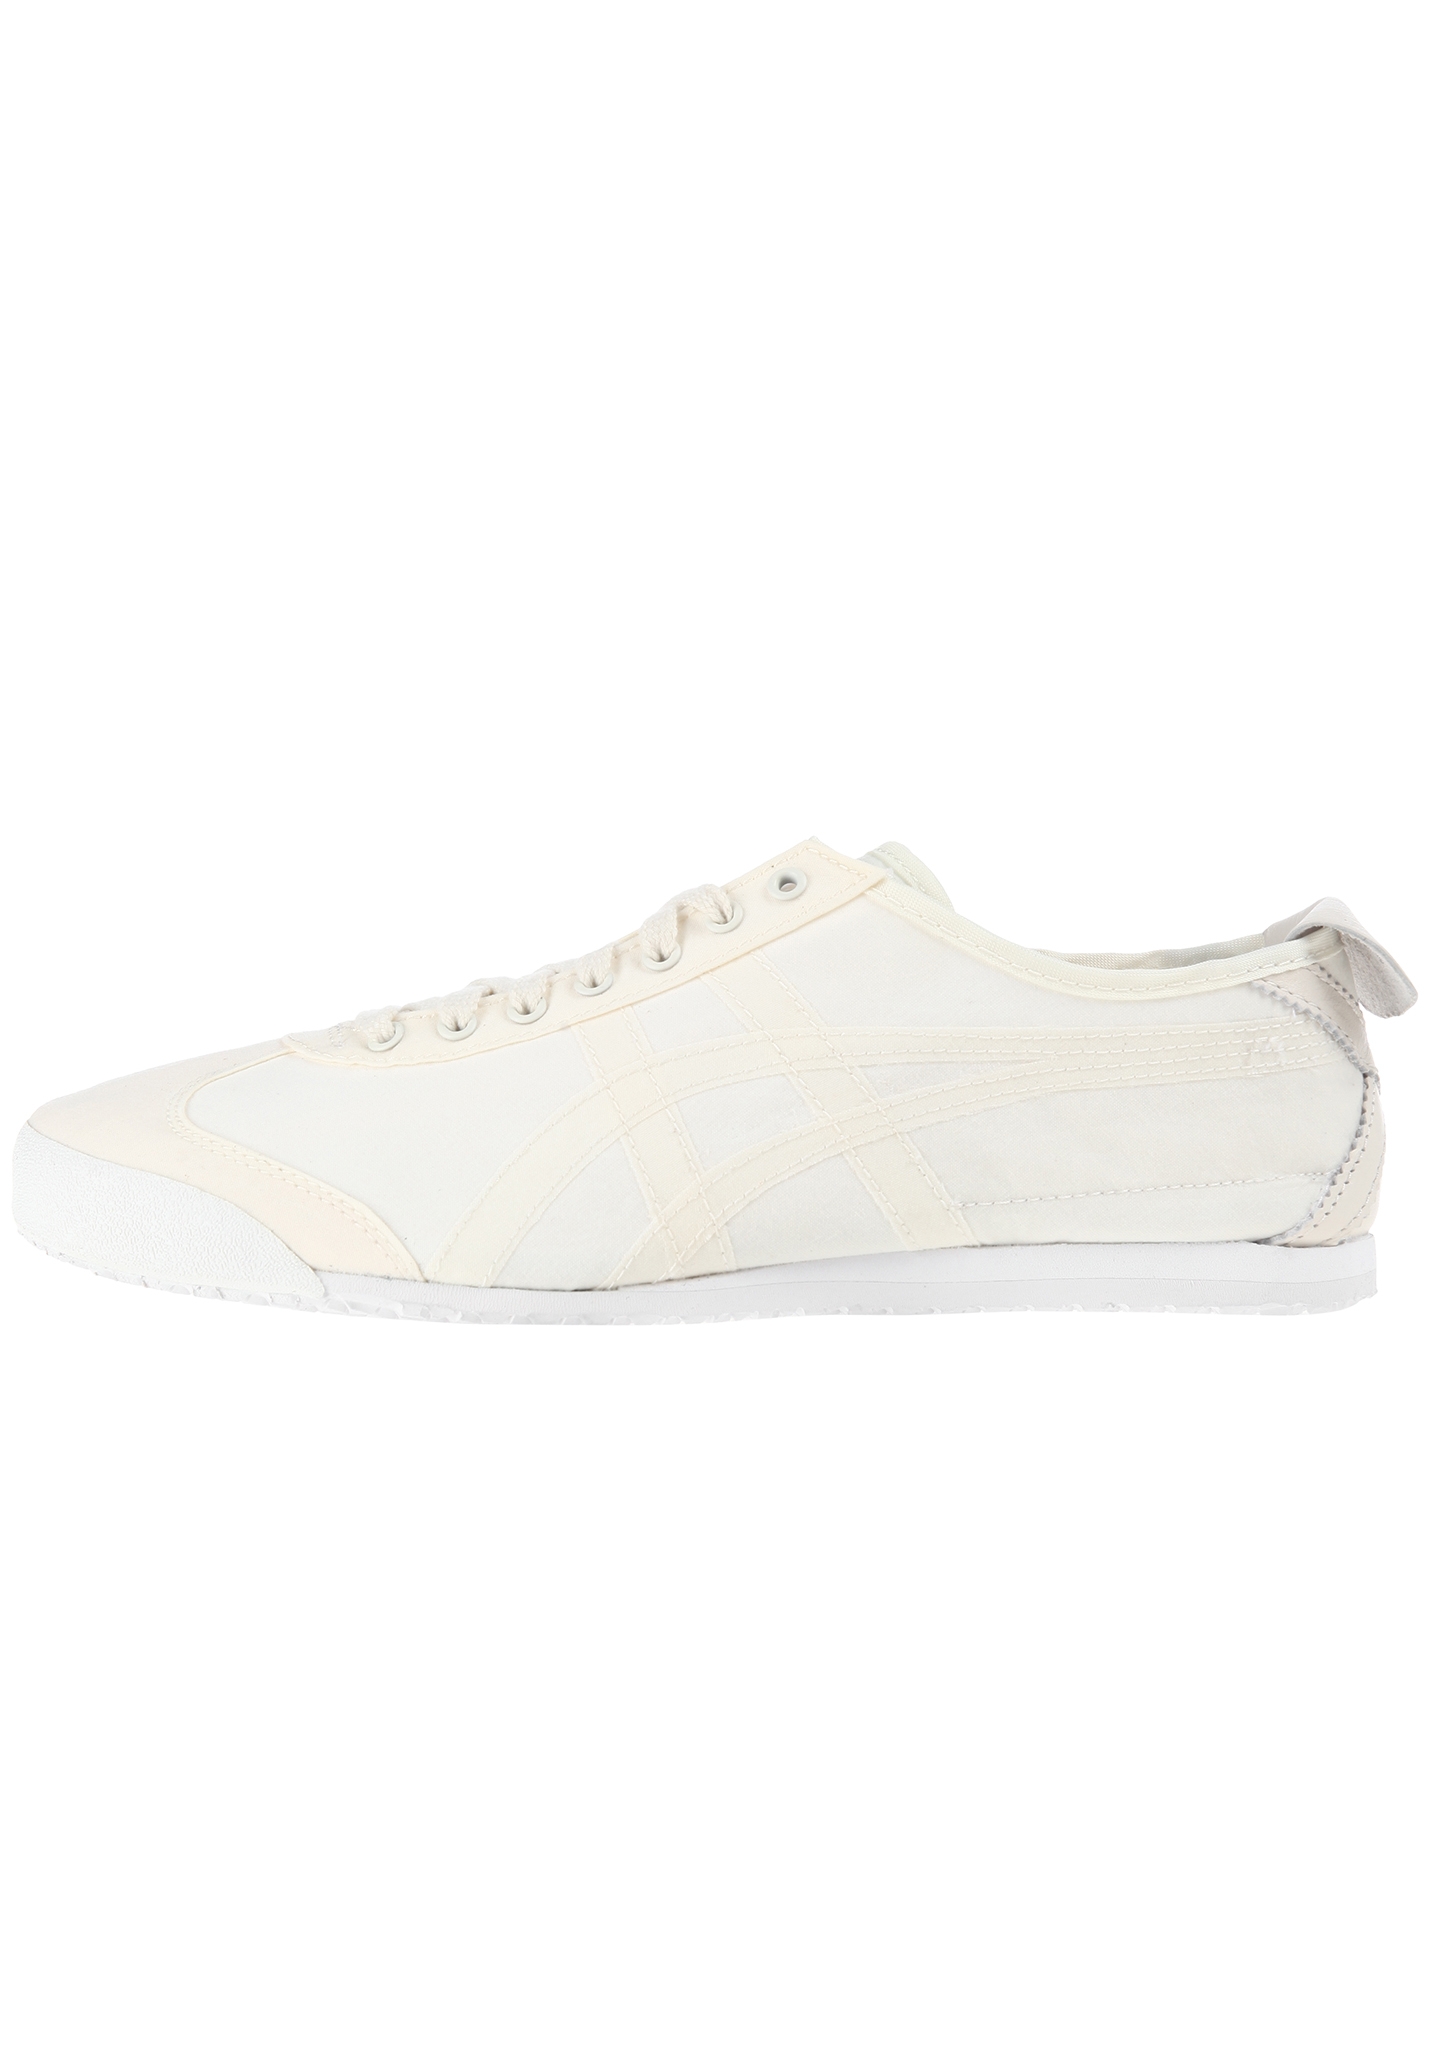 Onitsuka Tiger Mexico 66 Sneaker Low weiß 46